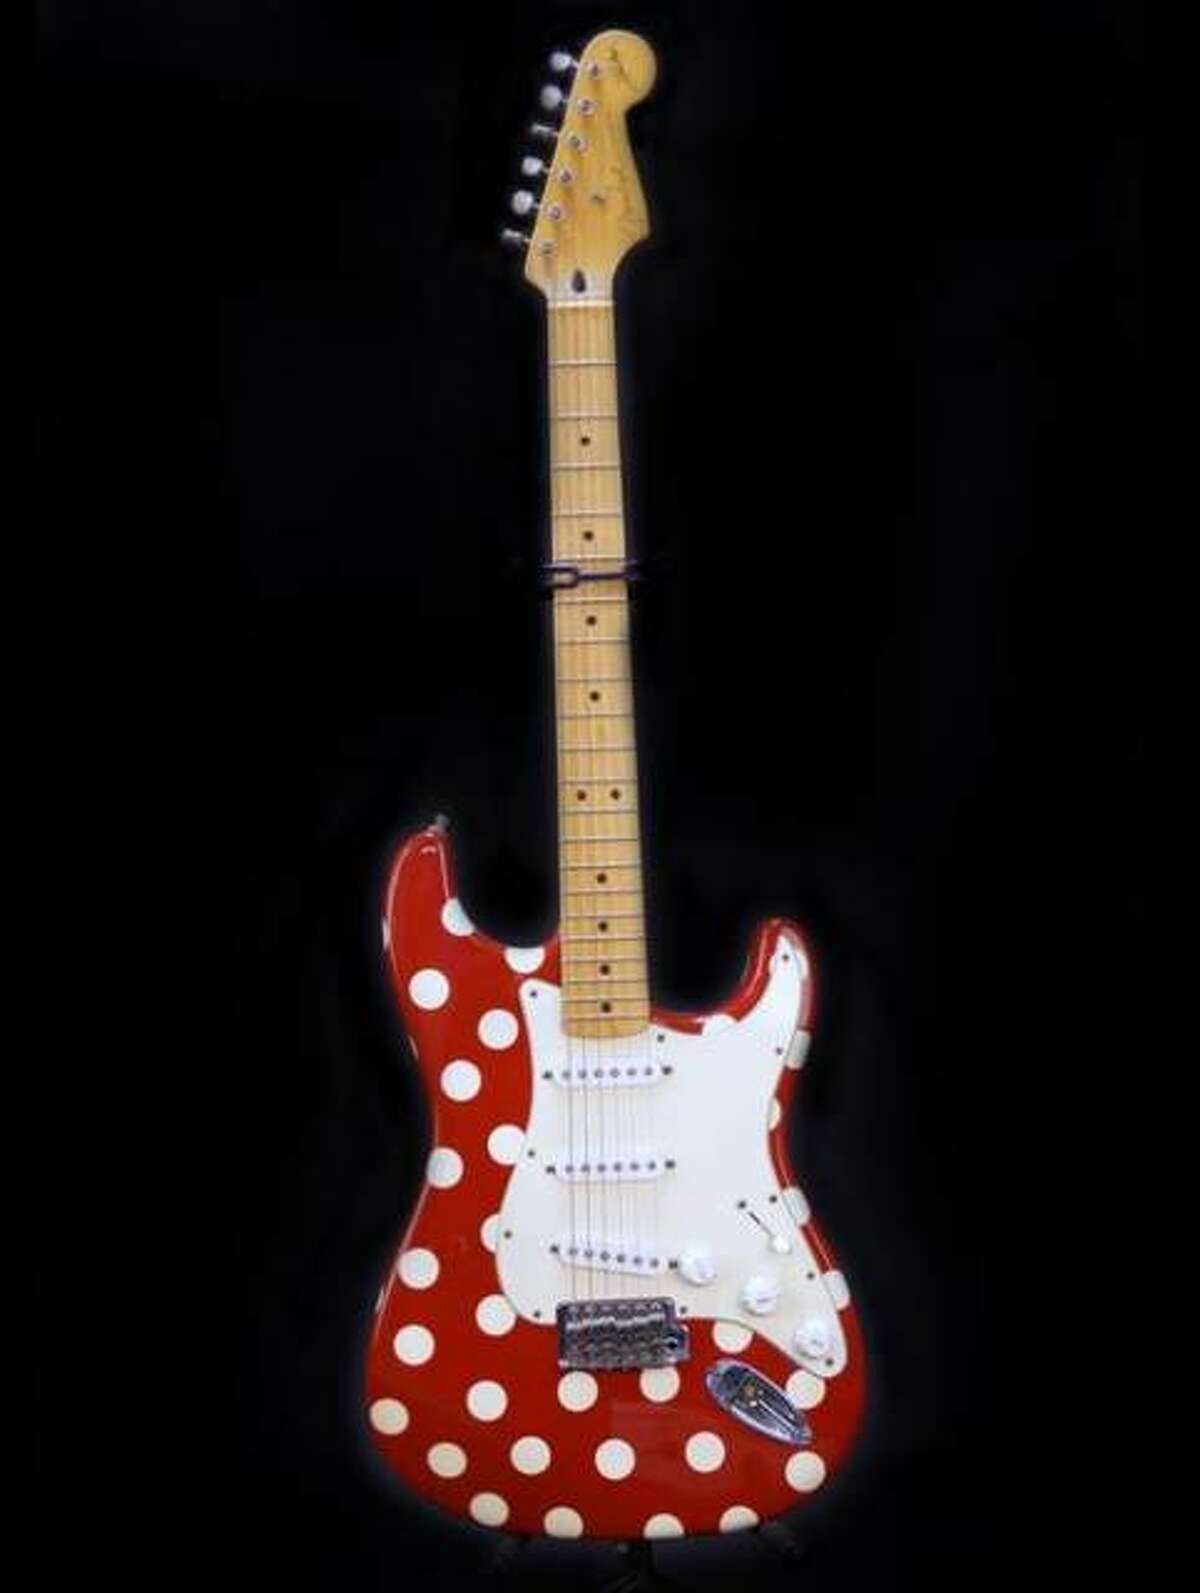 Blues legend Buddy Guy honors his late mother with the polka dot motif on this Feder Stratocaster that has become his trademark for instruments and clothing. The Fender company now makes a Buddy Guy signature guitar for musicians looking to emulate Guy’s ringing tone.